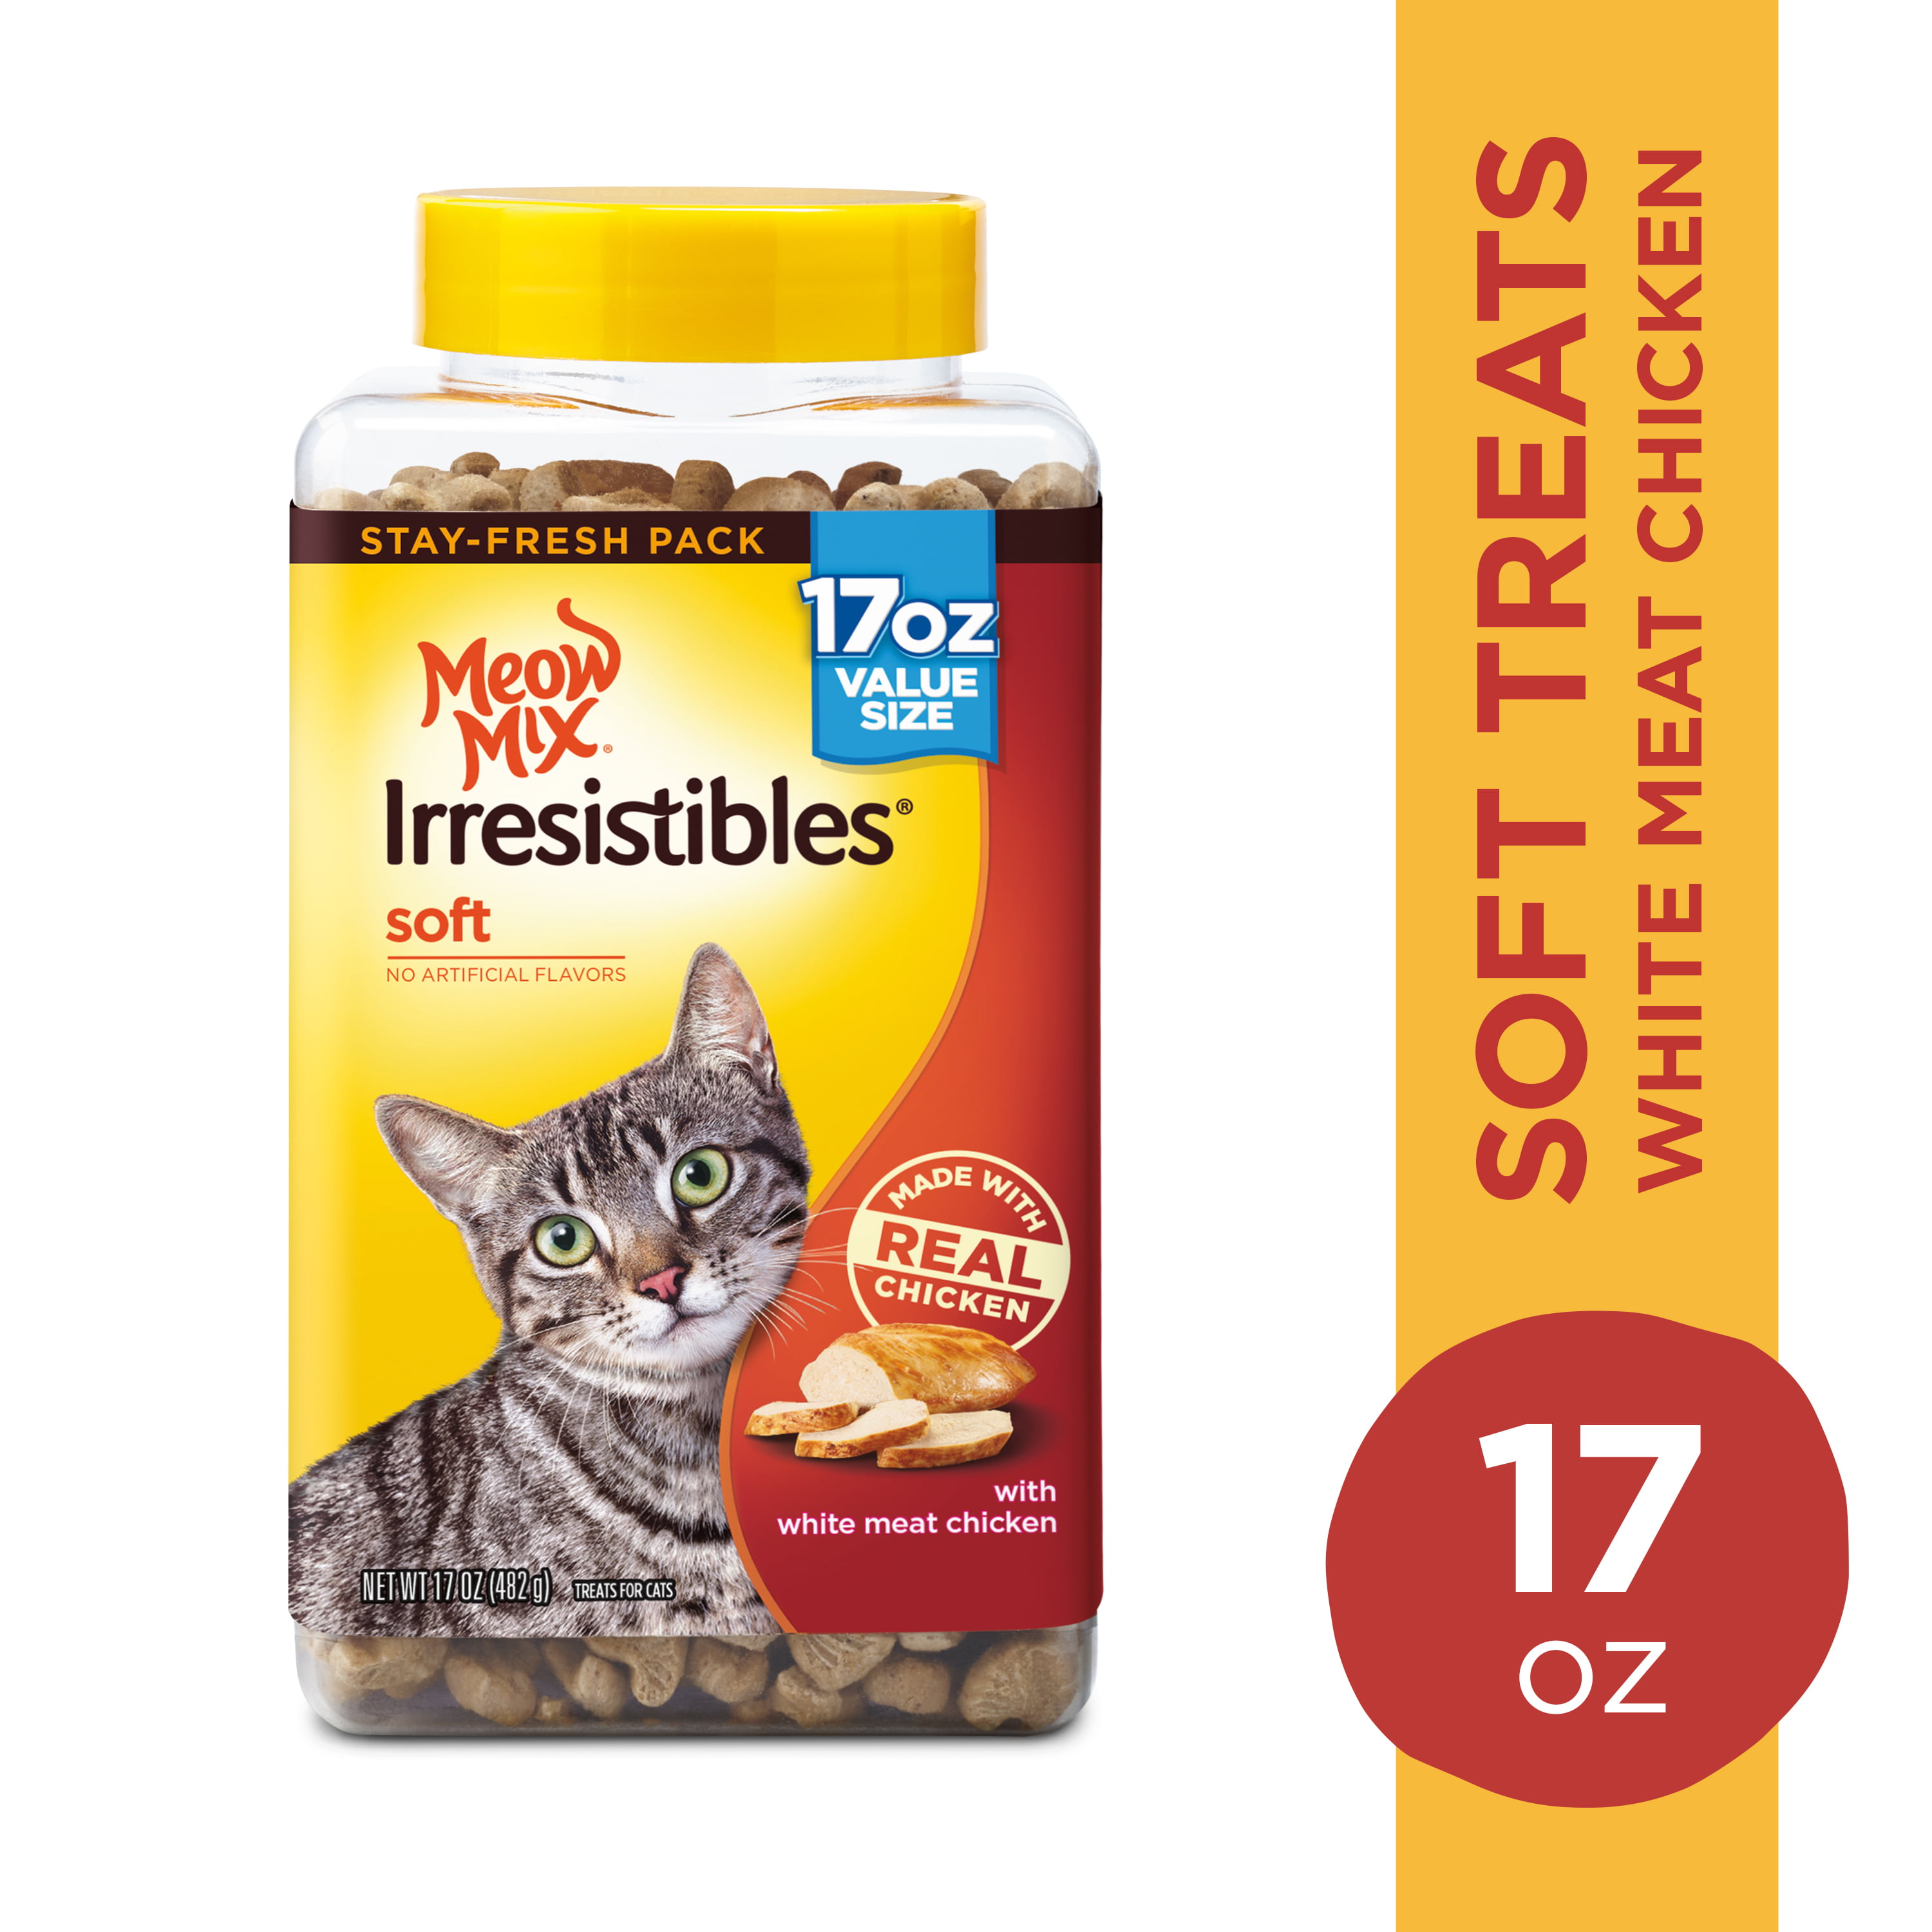 Meow Mix Irresistibles Cat Treats Soft With White Meat Chicken, 17